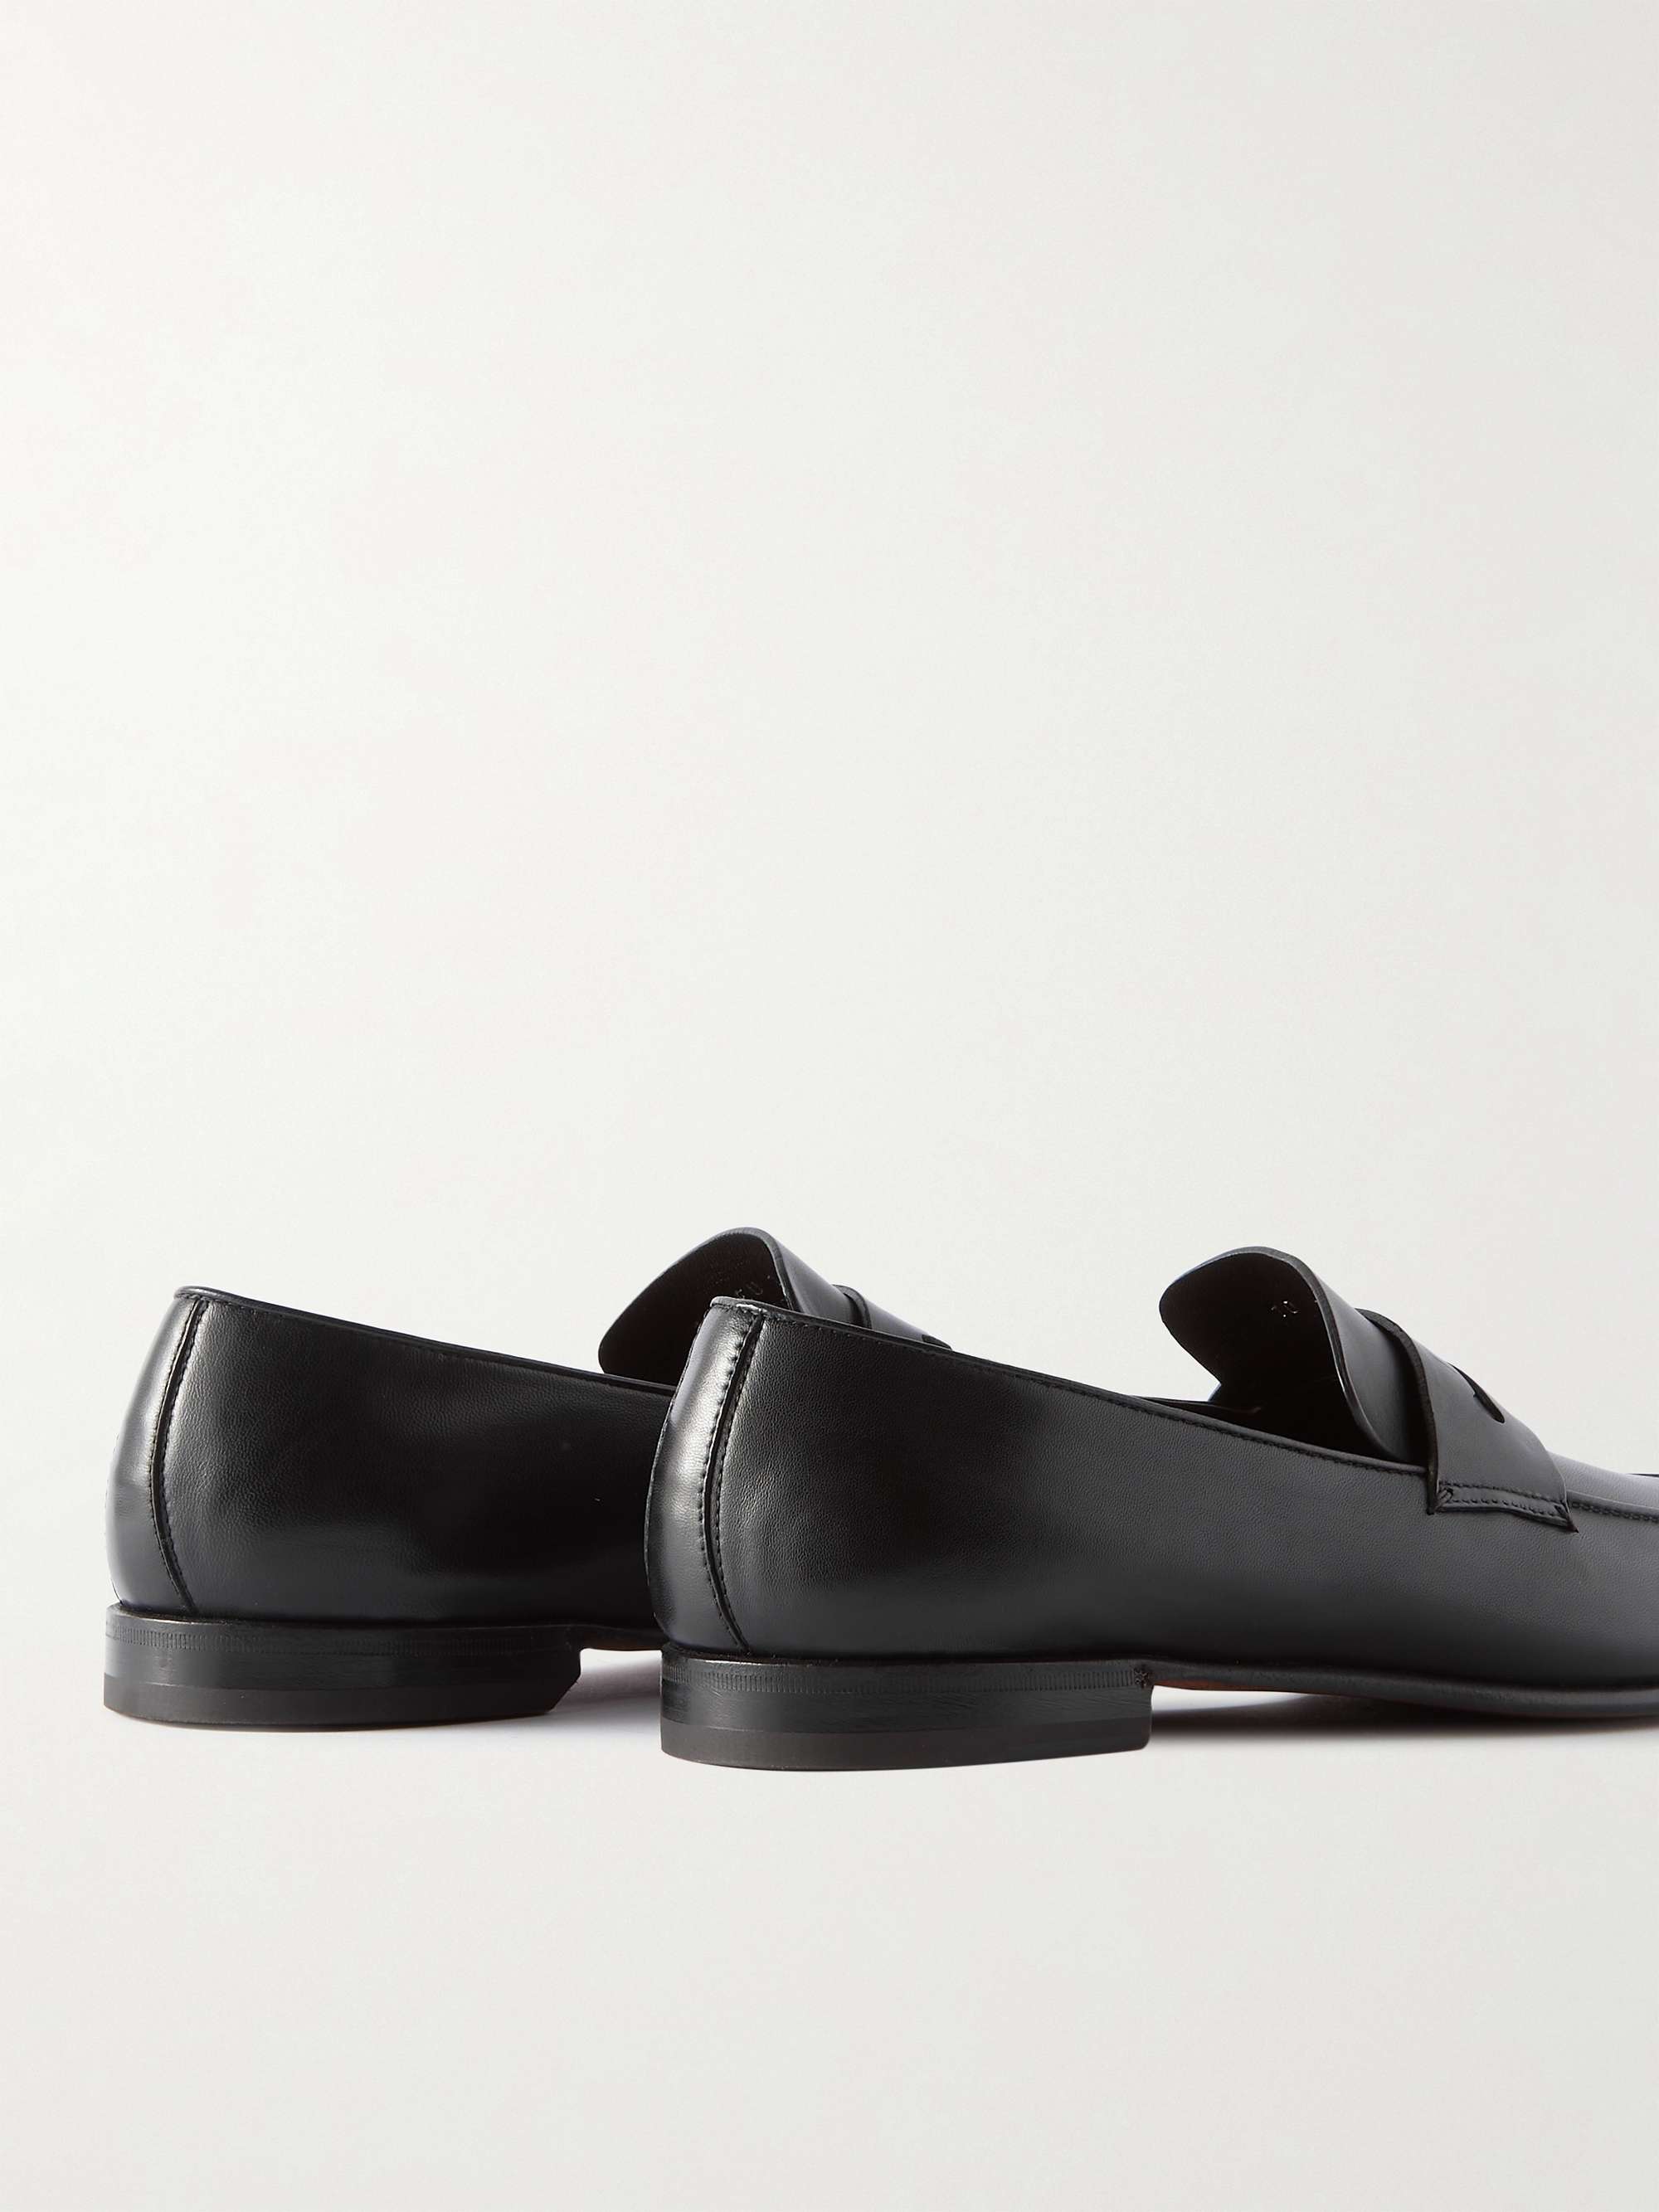 ZEGNA L'Asola Leather Penny Loafers